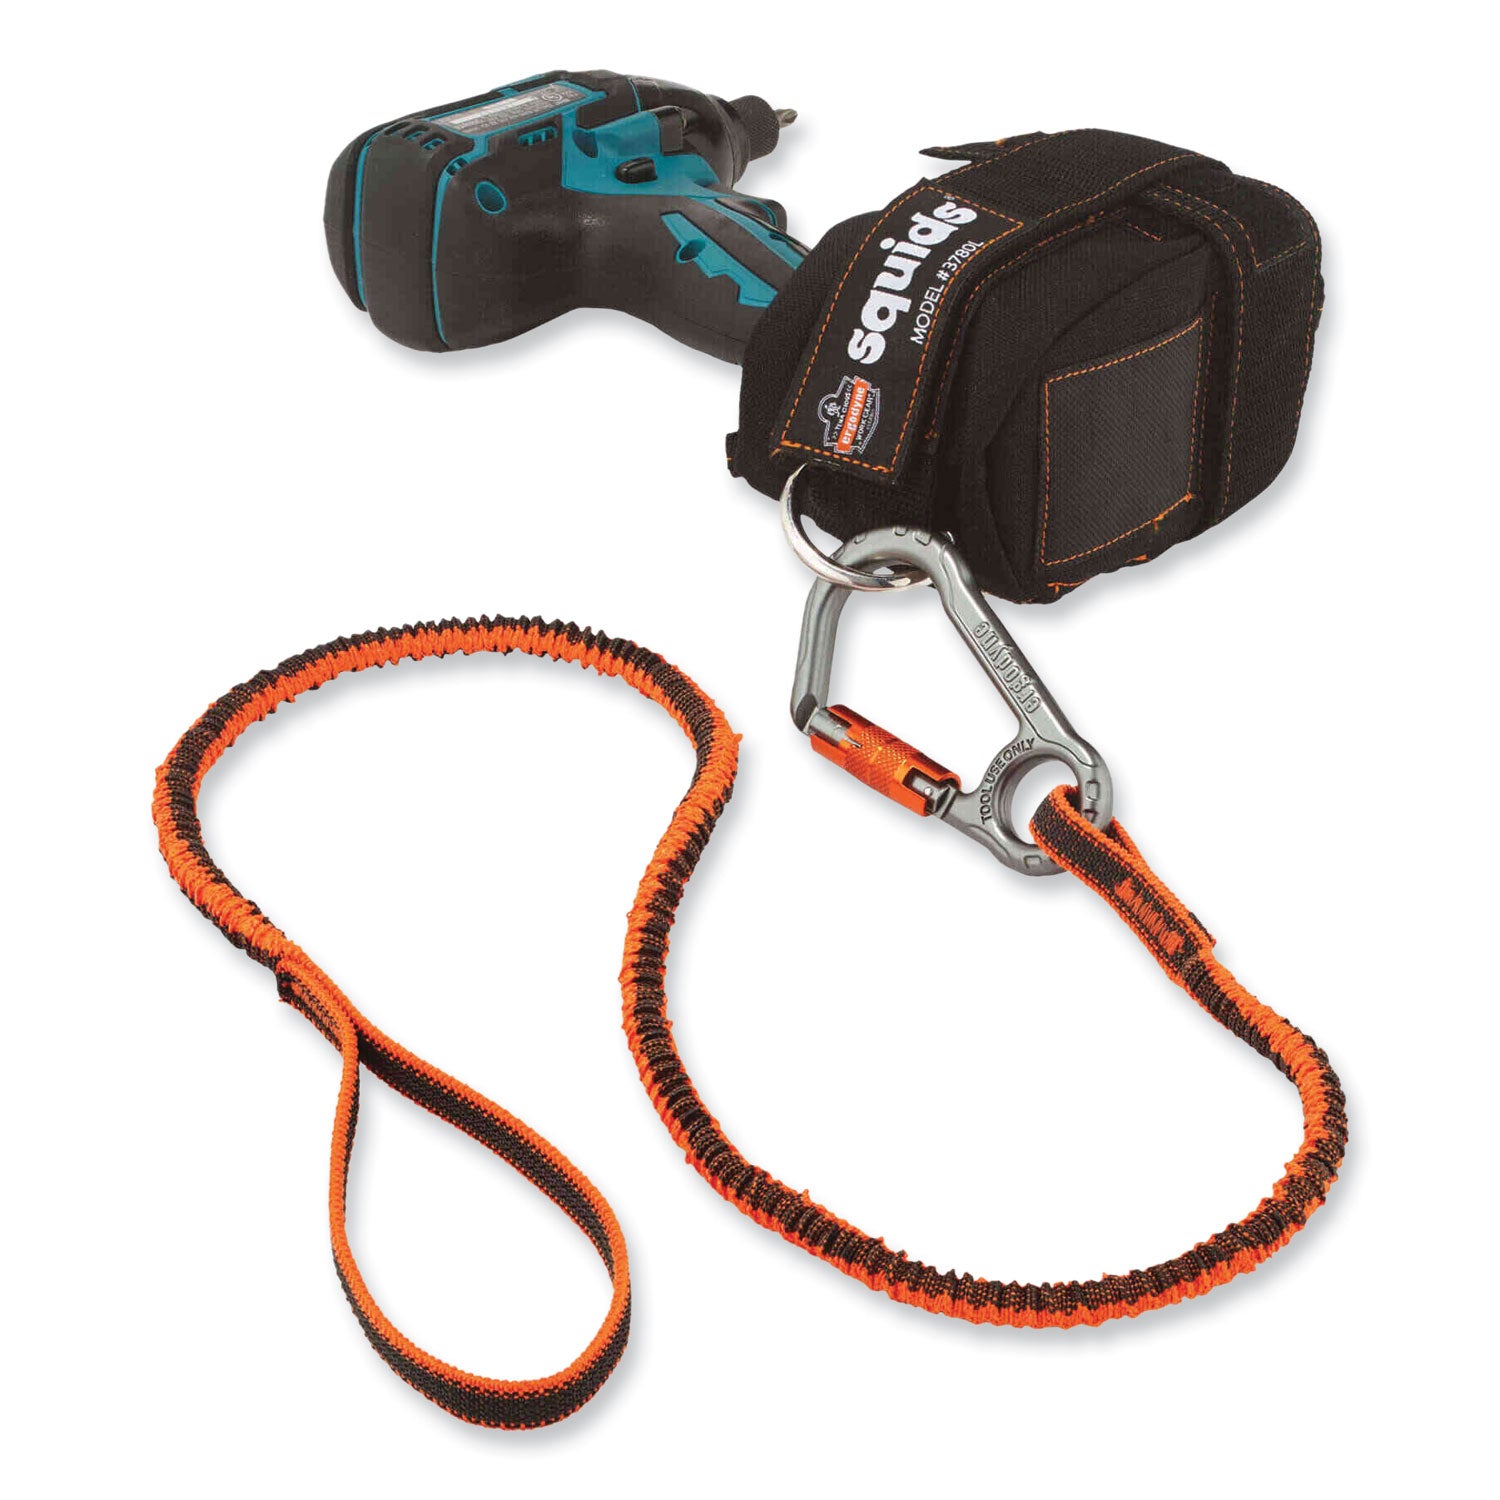 squids-3108fxtool-lanyard-w-locking-aluminum-carabiner+loop-15lb-max-work-cap-38-to-48or-gyships-in-1-3-business-days_ego19808 - 4